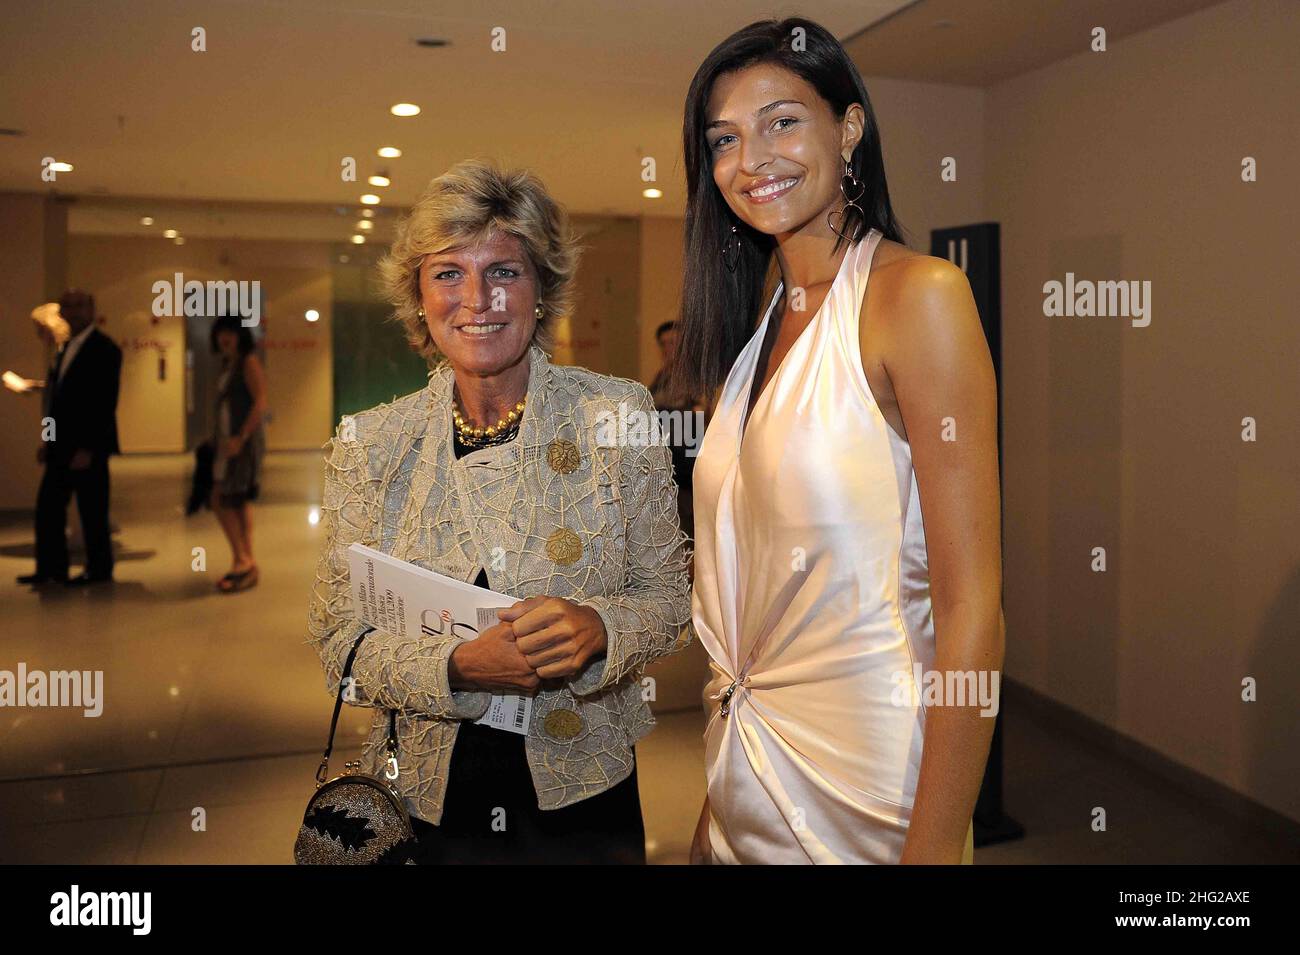 Cristina Chiabotto and Evelina Cristillin arriving for the performance by the Saint Petersburg Philharmonic Orchestra, as part of the 'MITO SettembreMusica 2009' music festival, held in Turin, Italy.  Stock Photo